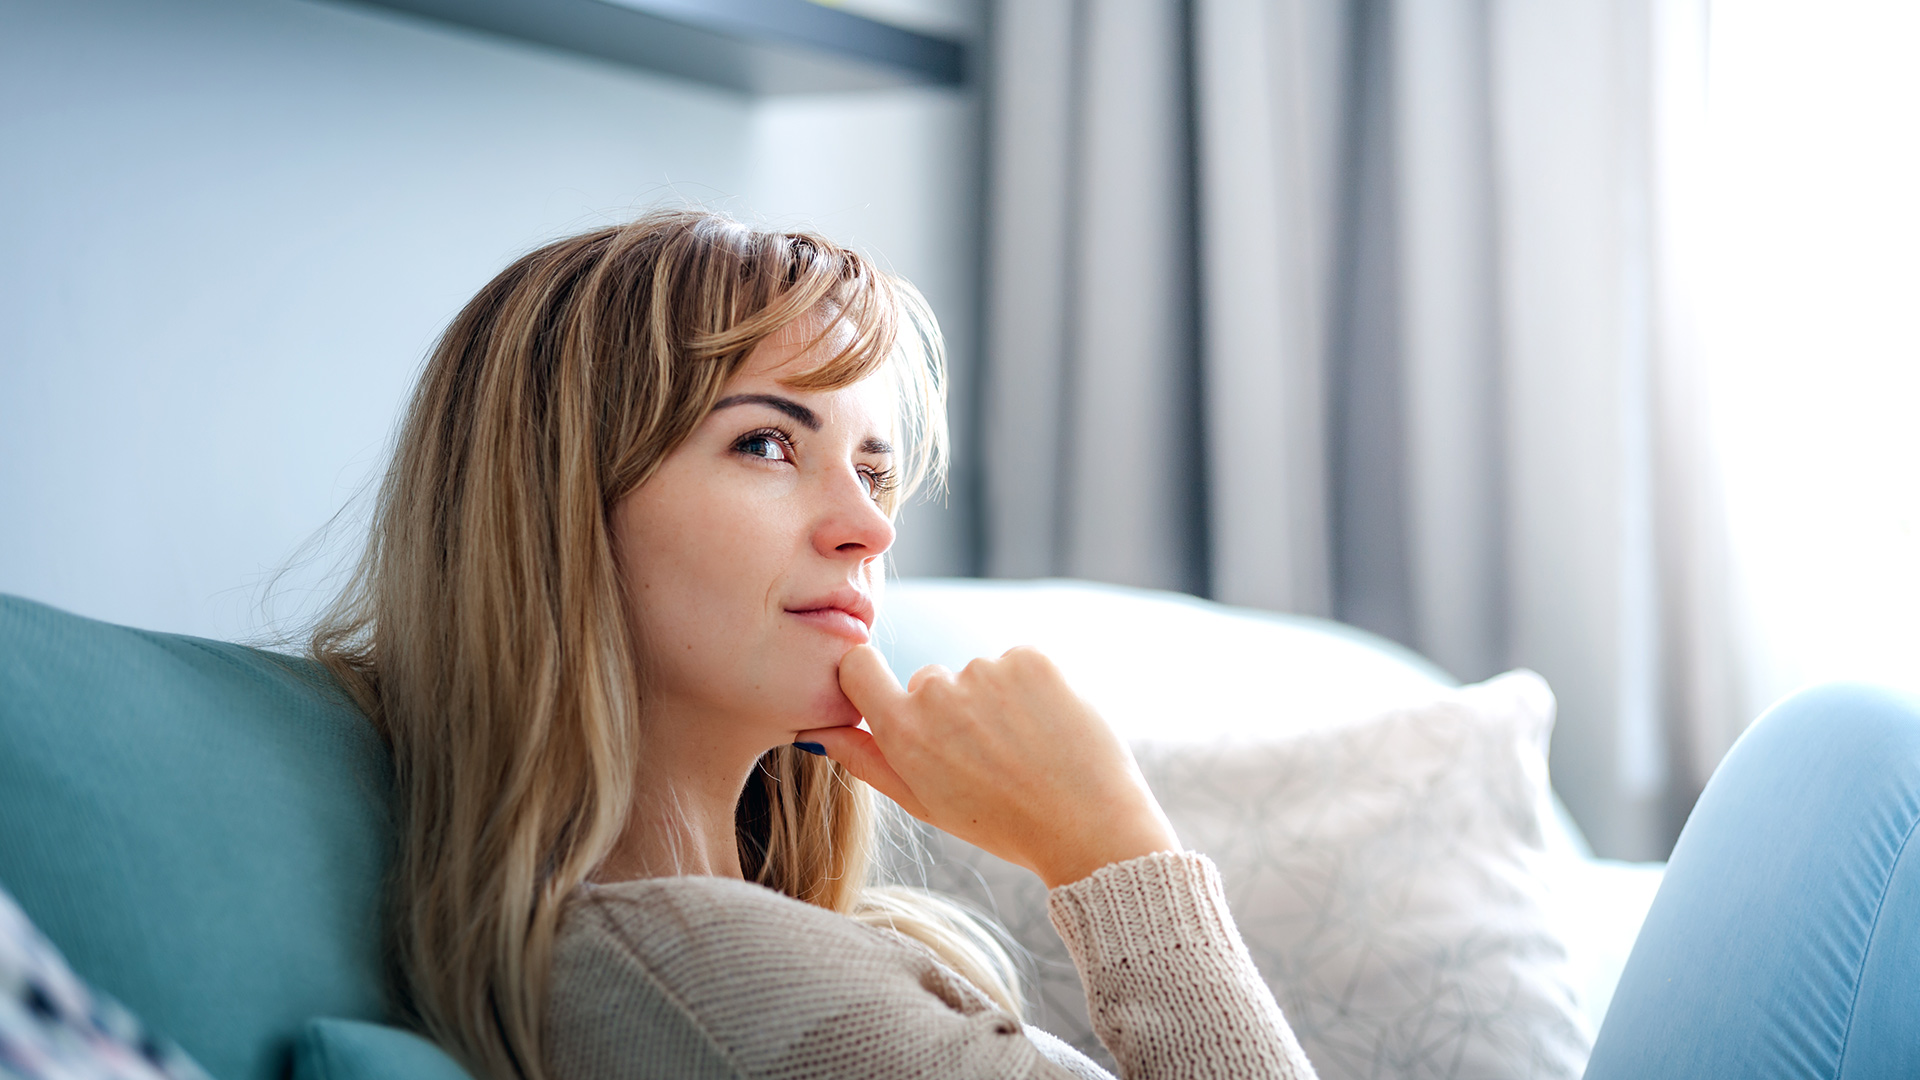 Woman with fringe bangs, wearing a grey sweater and blue jean, sitting on a turquoise couch, rubbing her chin while thinking.